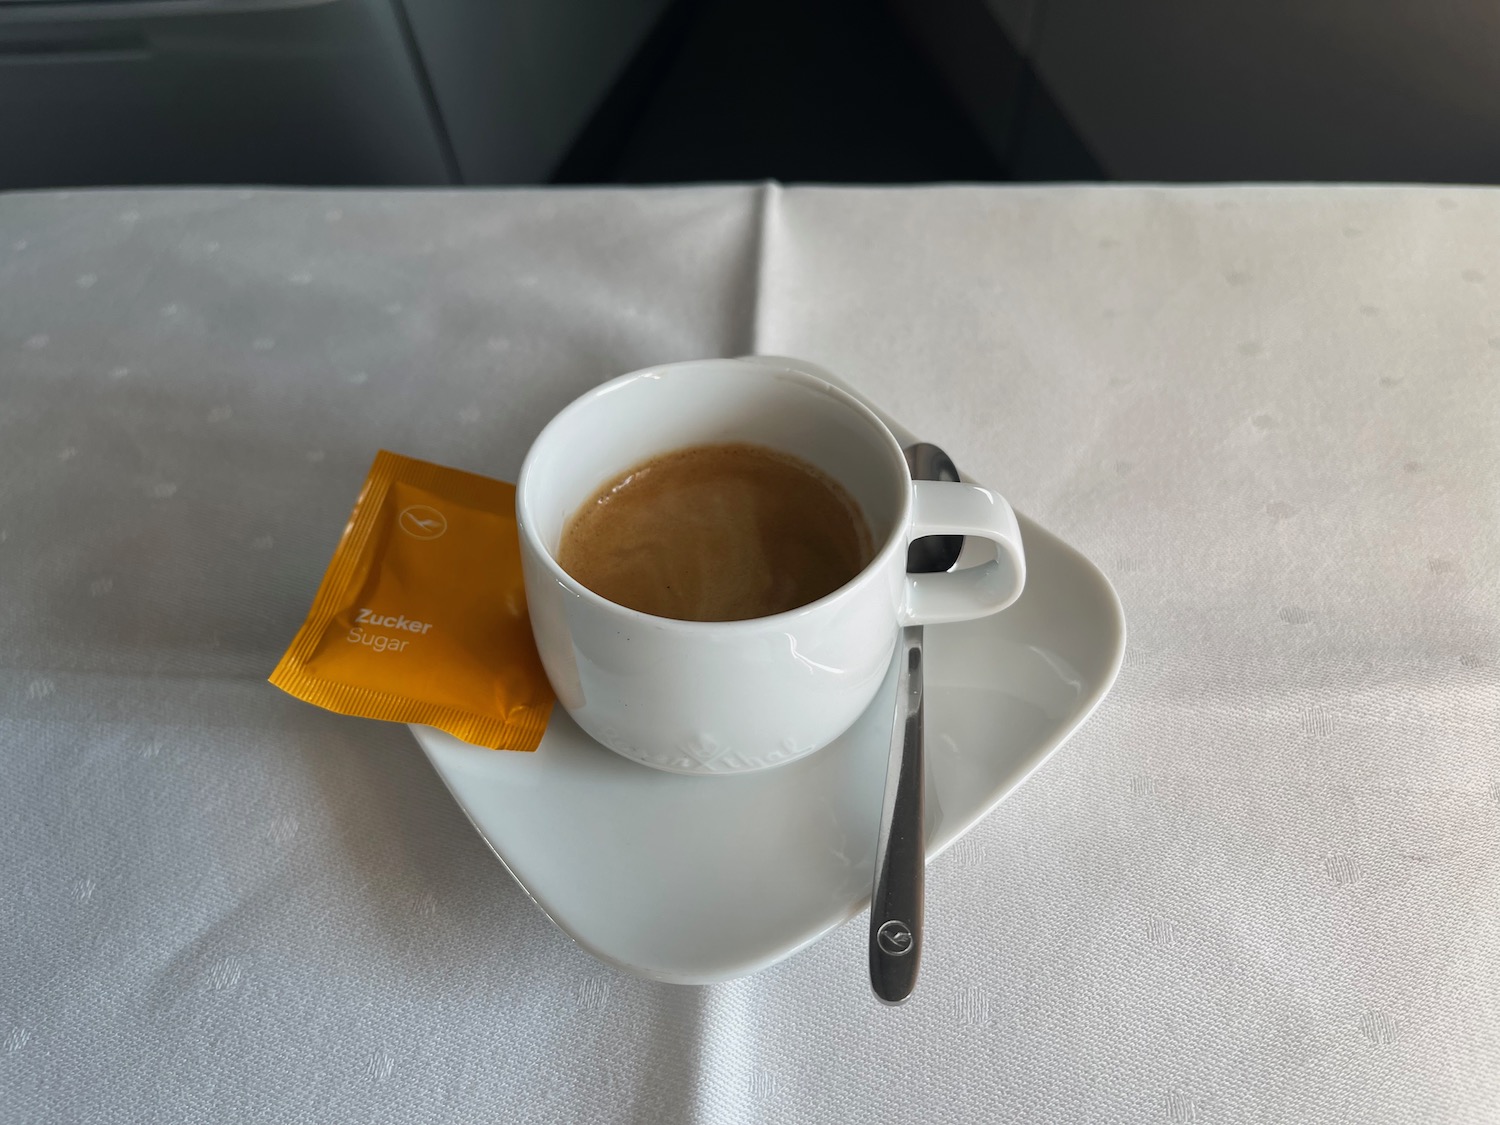 a cup of coffee on a saucer with a spoon and sugar packet